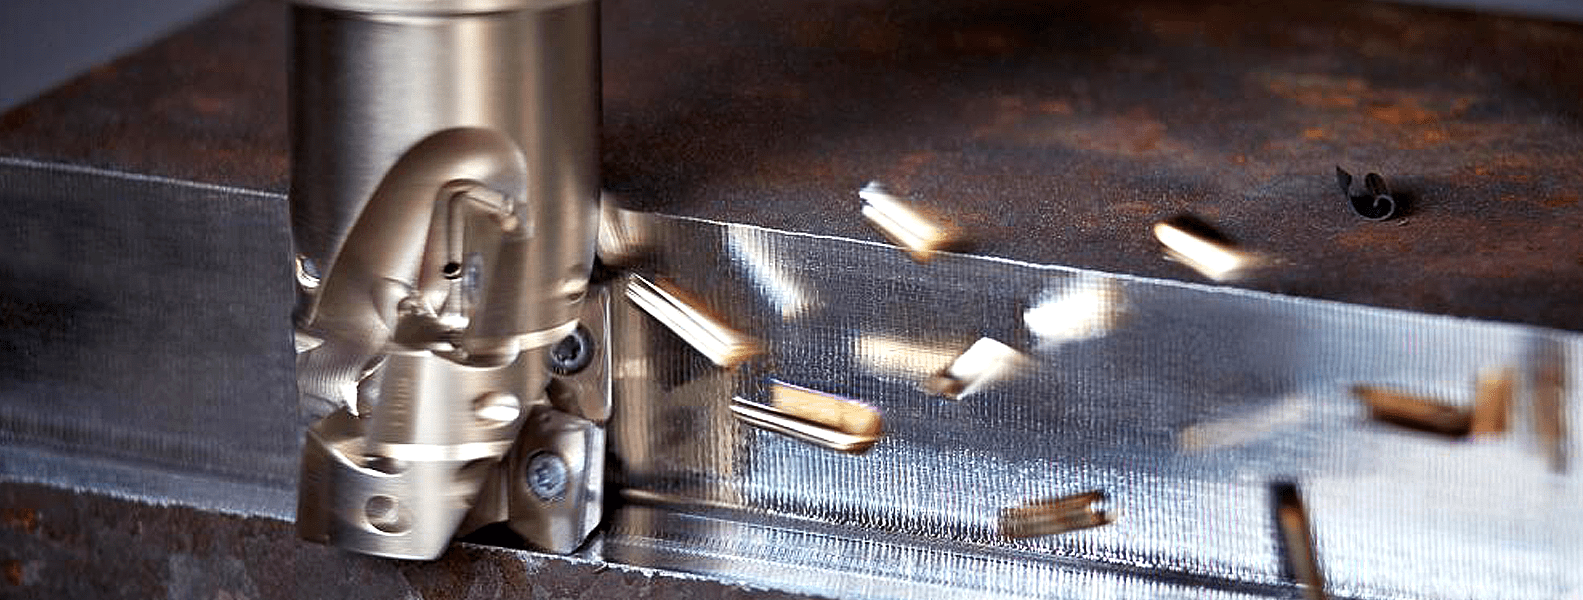 A machine cutting metal with many pieces of metal.